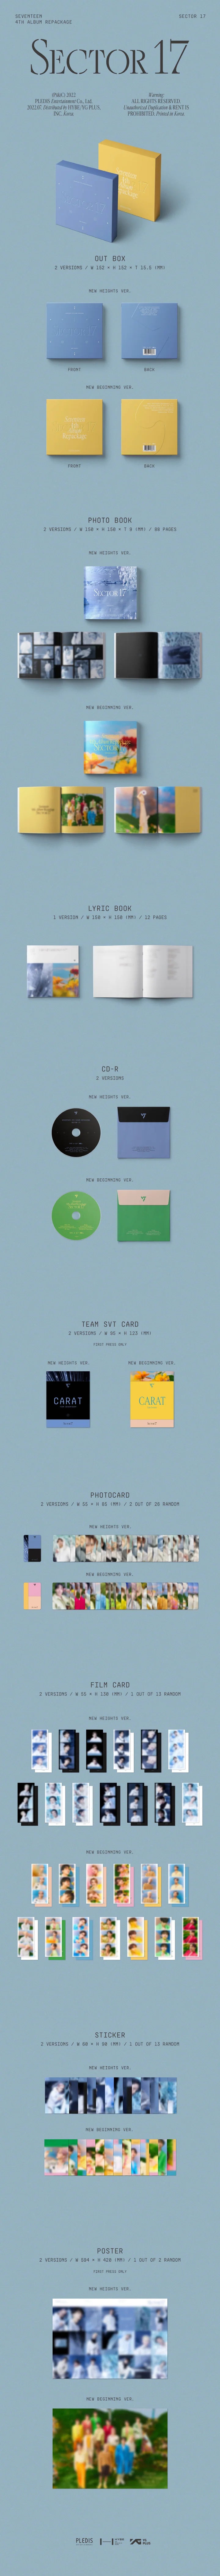 SEVENTEEN - 4TH FULL ALBUM REPACKAGE SECTOR 17 Infographic